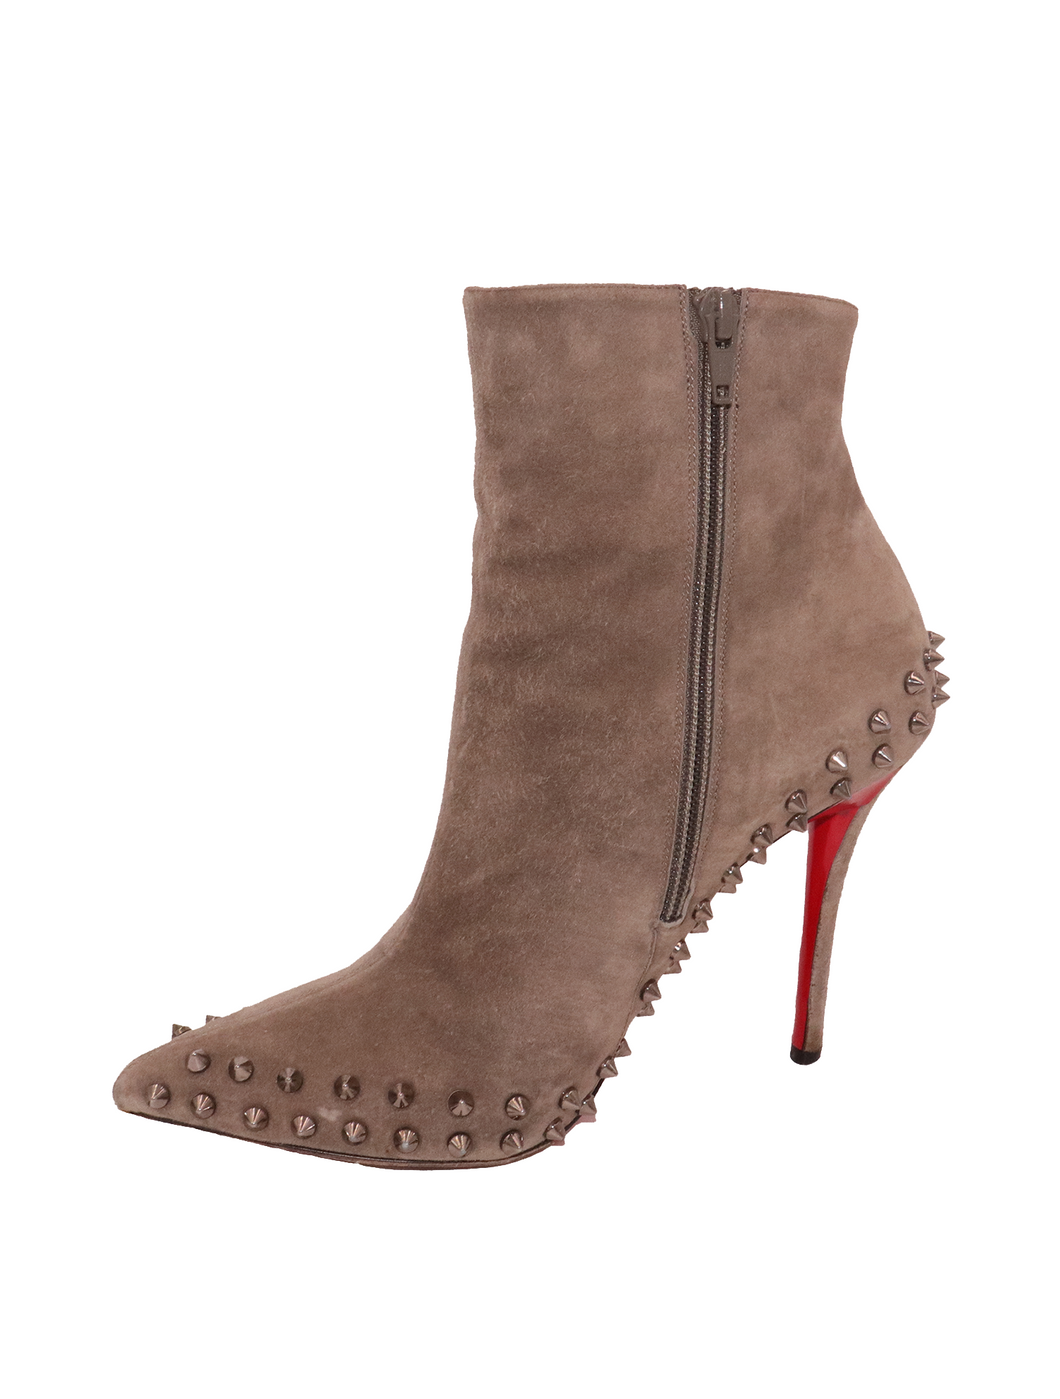 Christian Louboutin Willeta Spike Ankle Boots